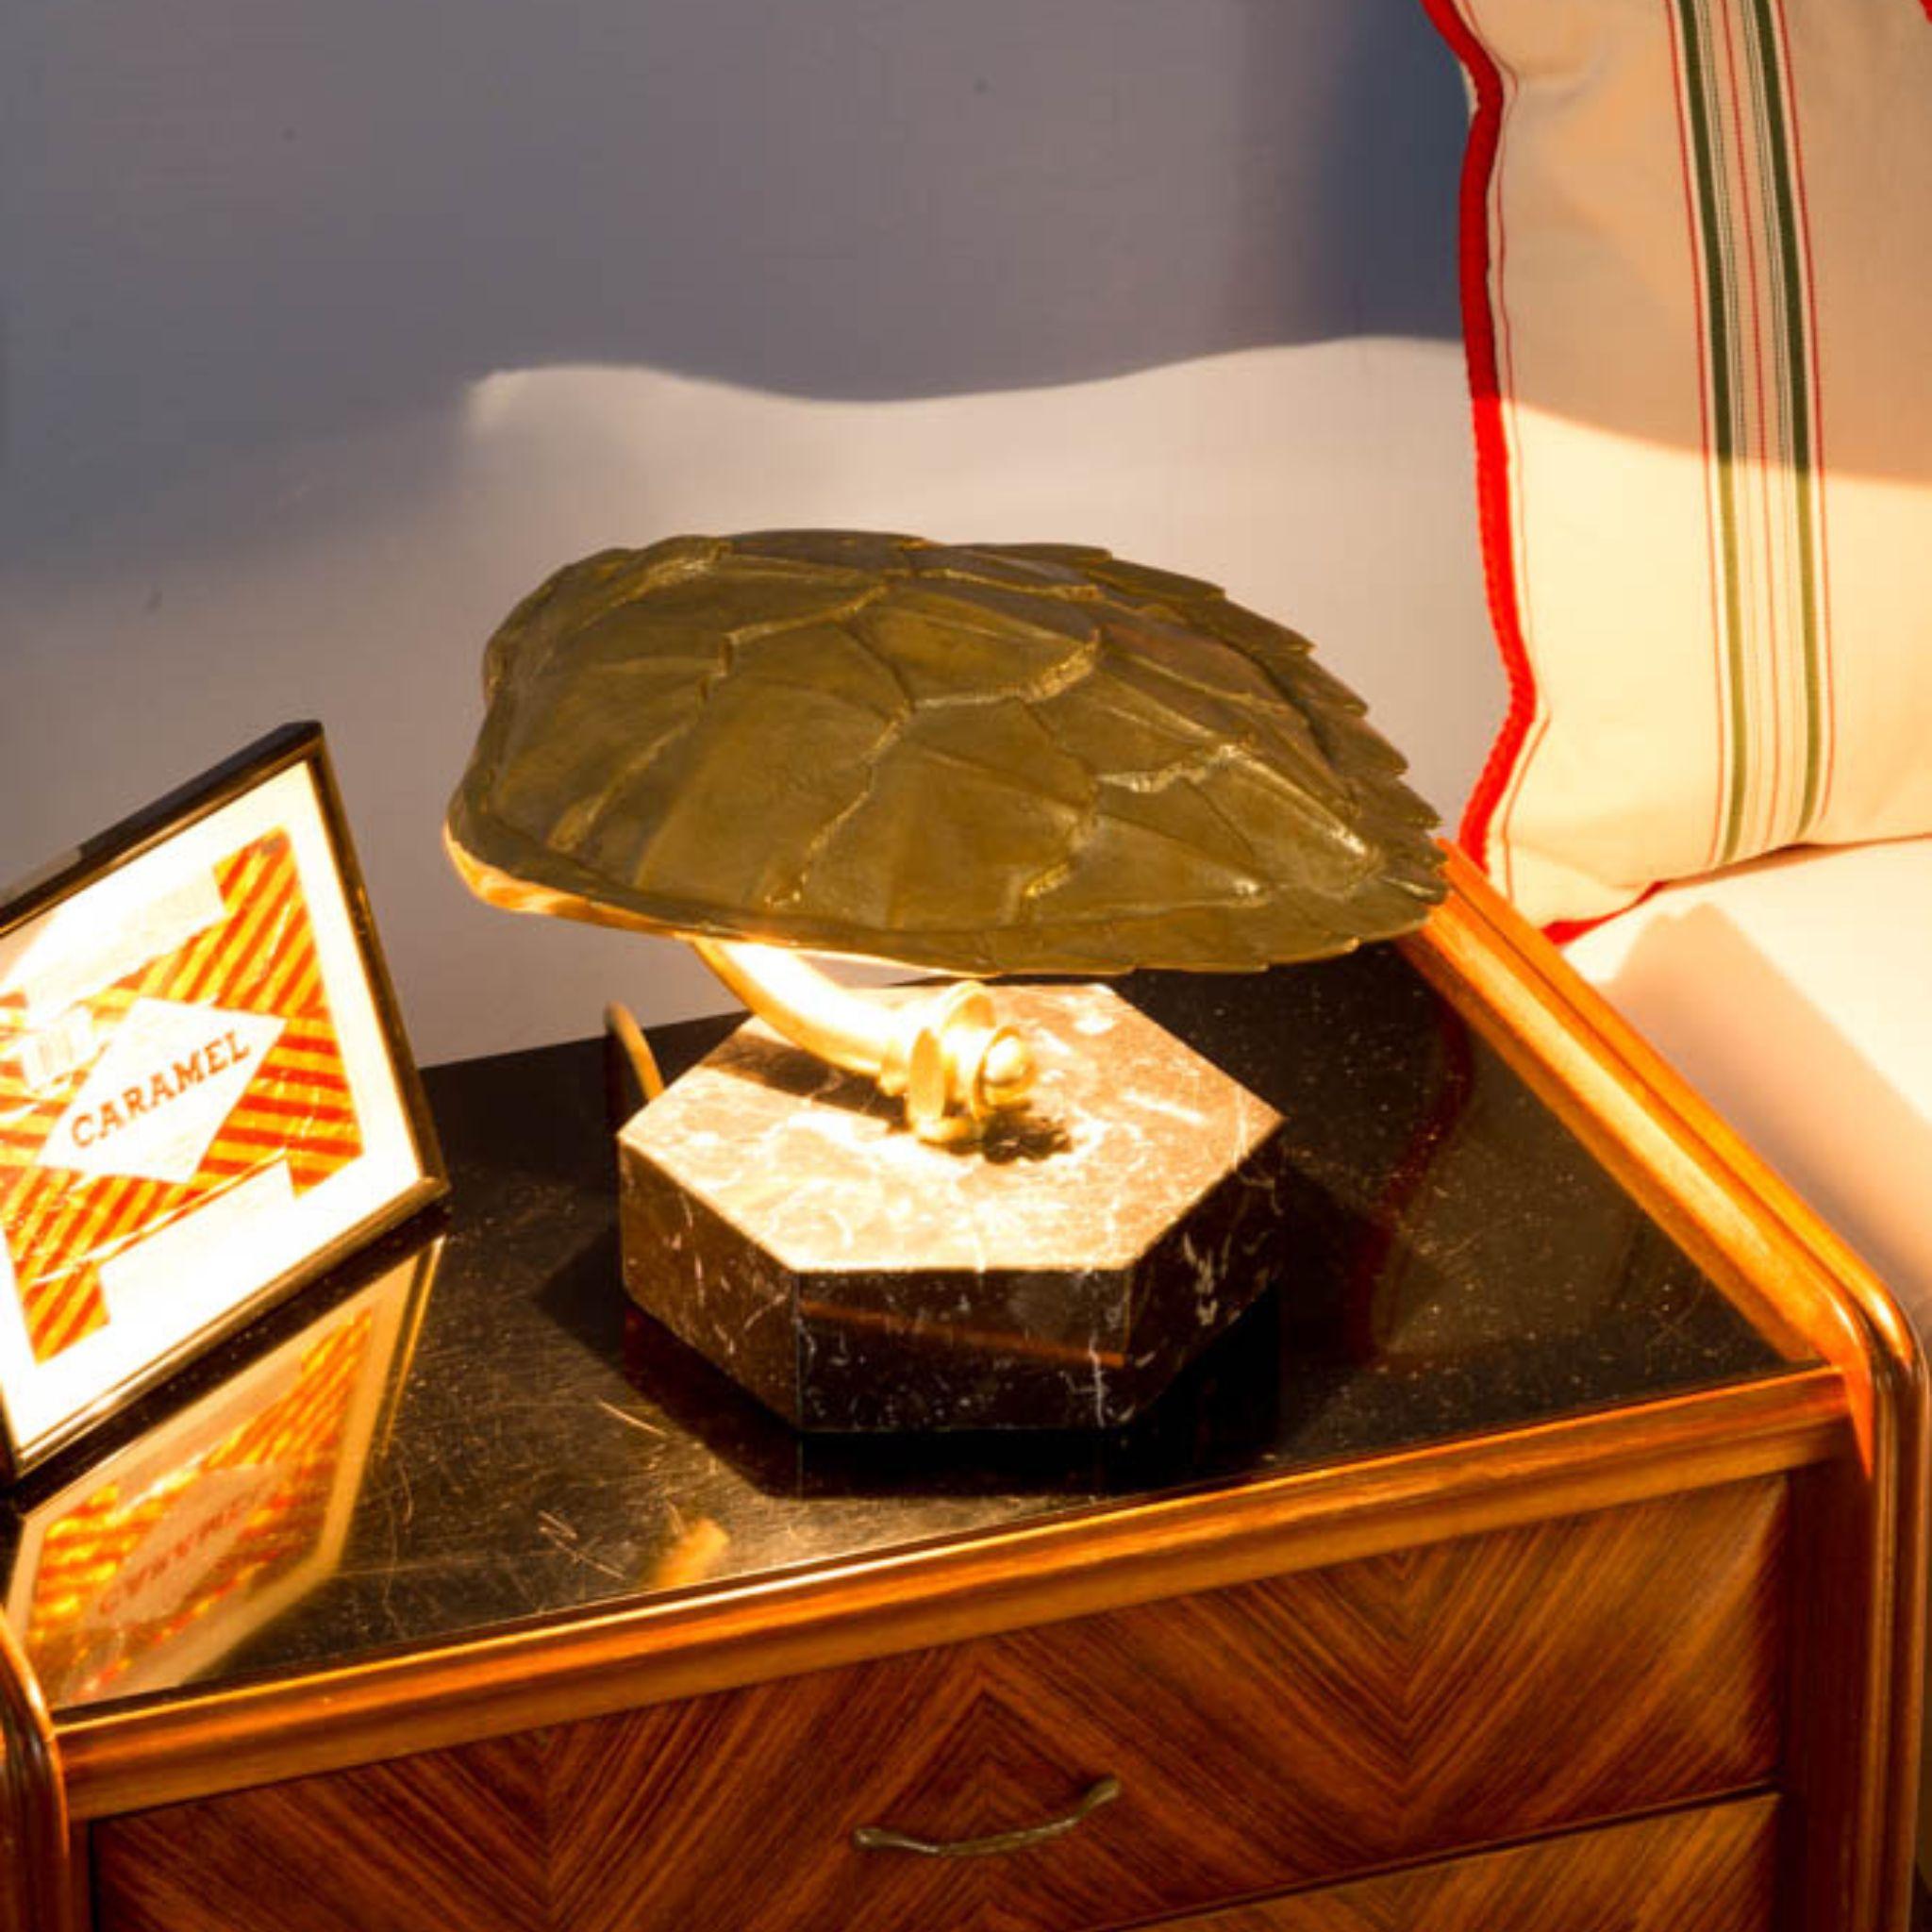 This table lamp belongs to the Fauna line of the Eclectic collection, it has a casted brass turtle shell, natural finish, on an exagonal black Marquinia marble base. The table lamp can be customized either in the marble base color and brass